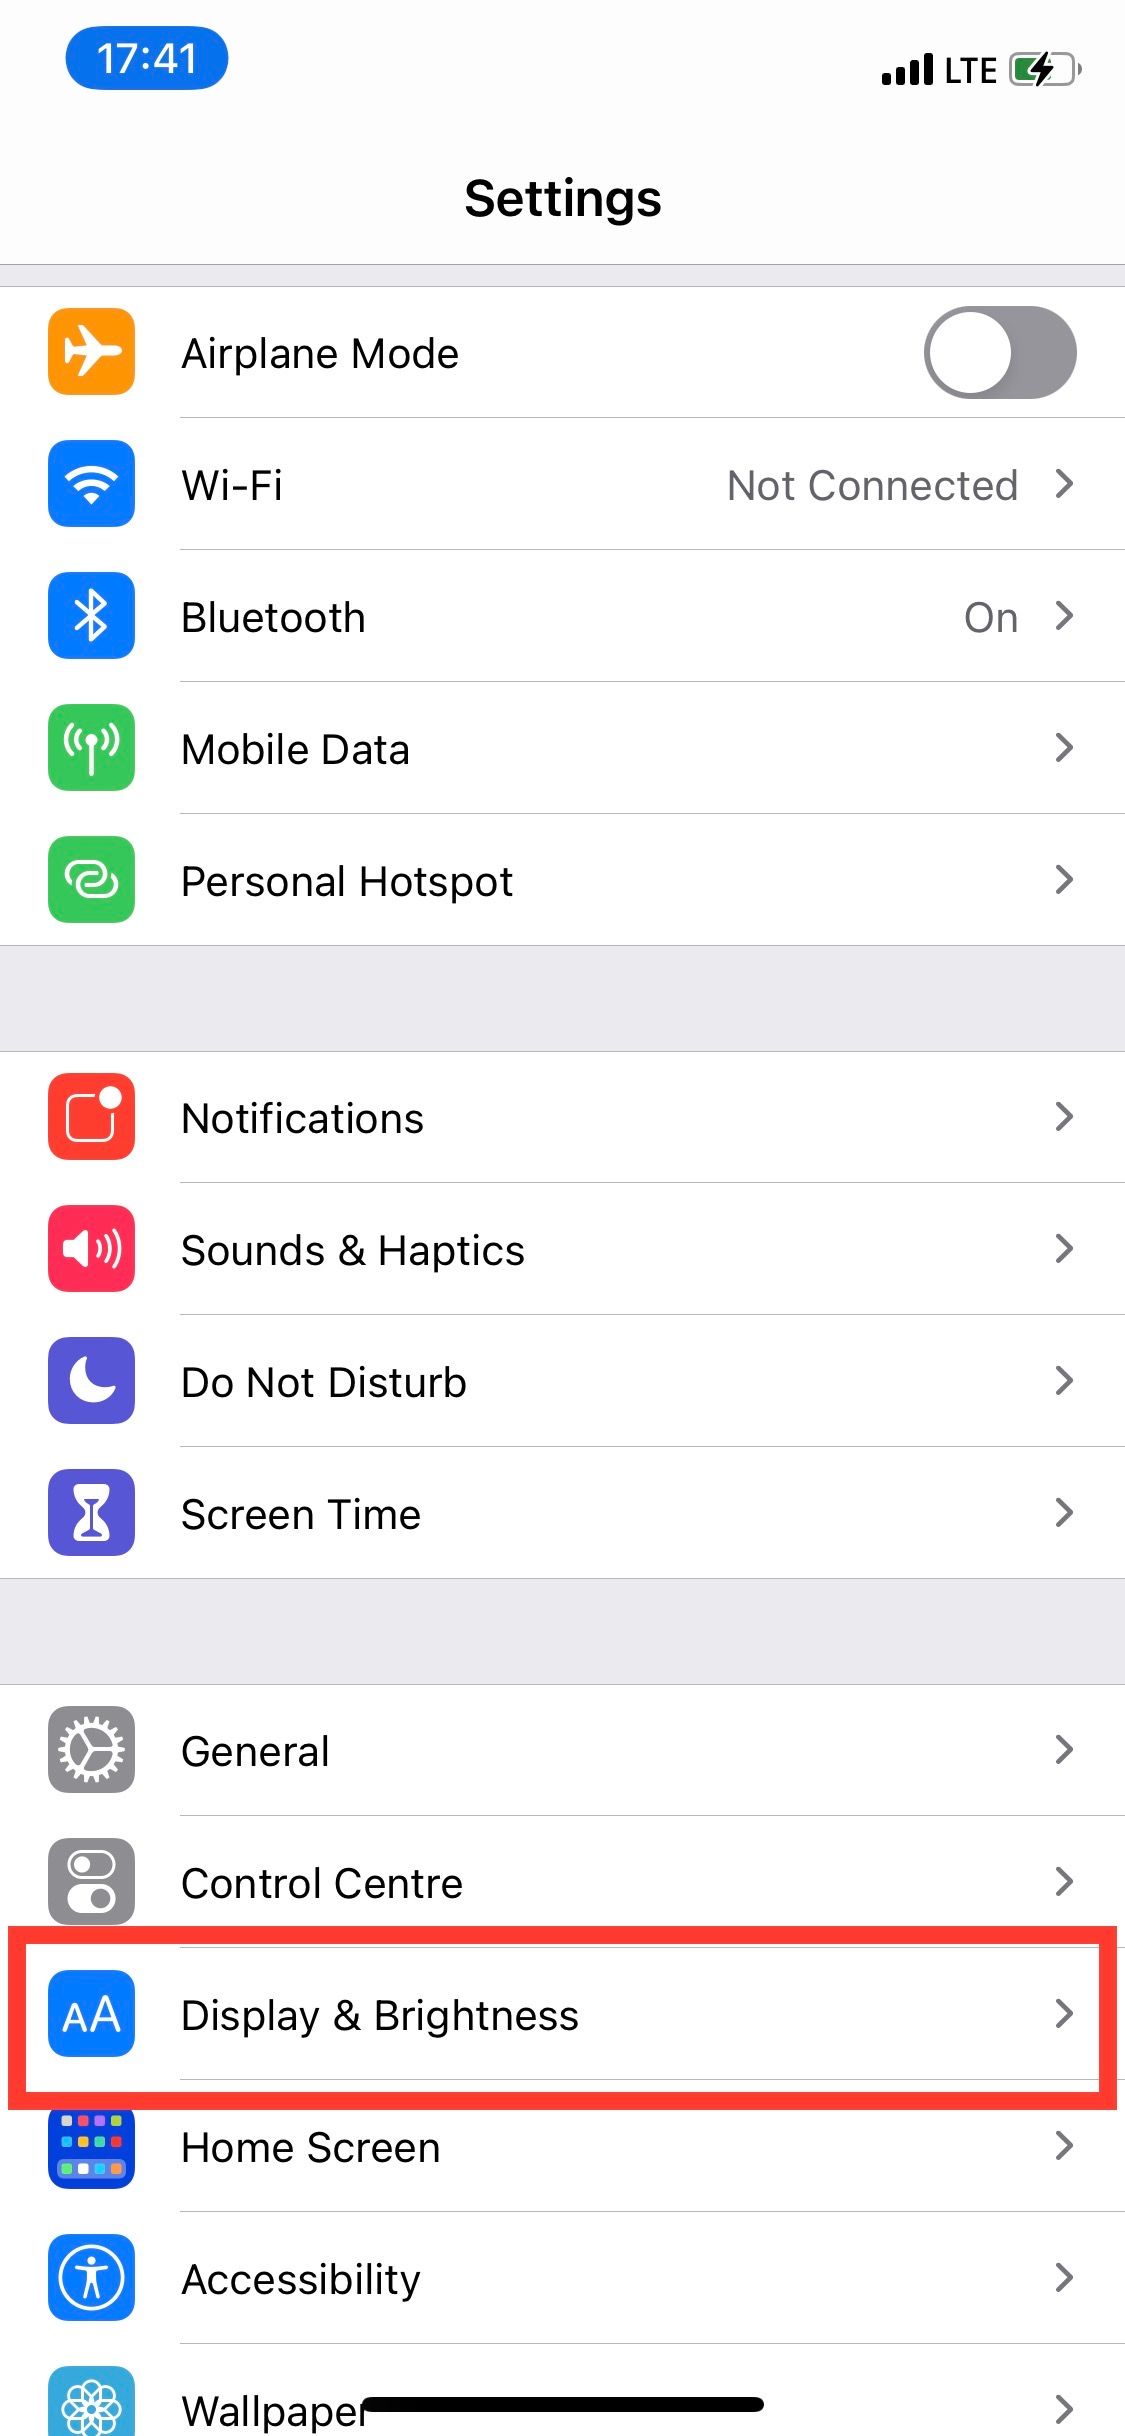 iPhones settings menu with Display & Brightness section highlighted